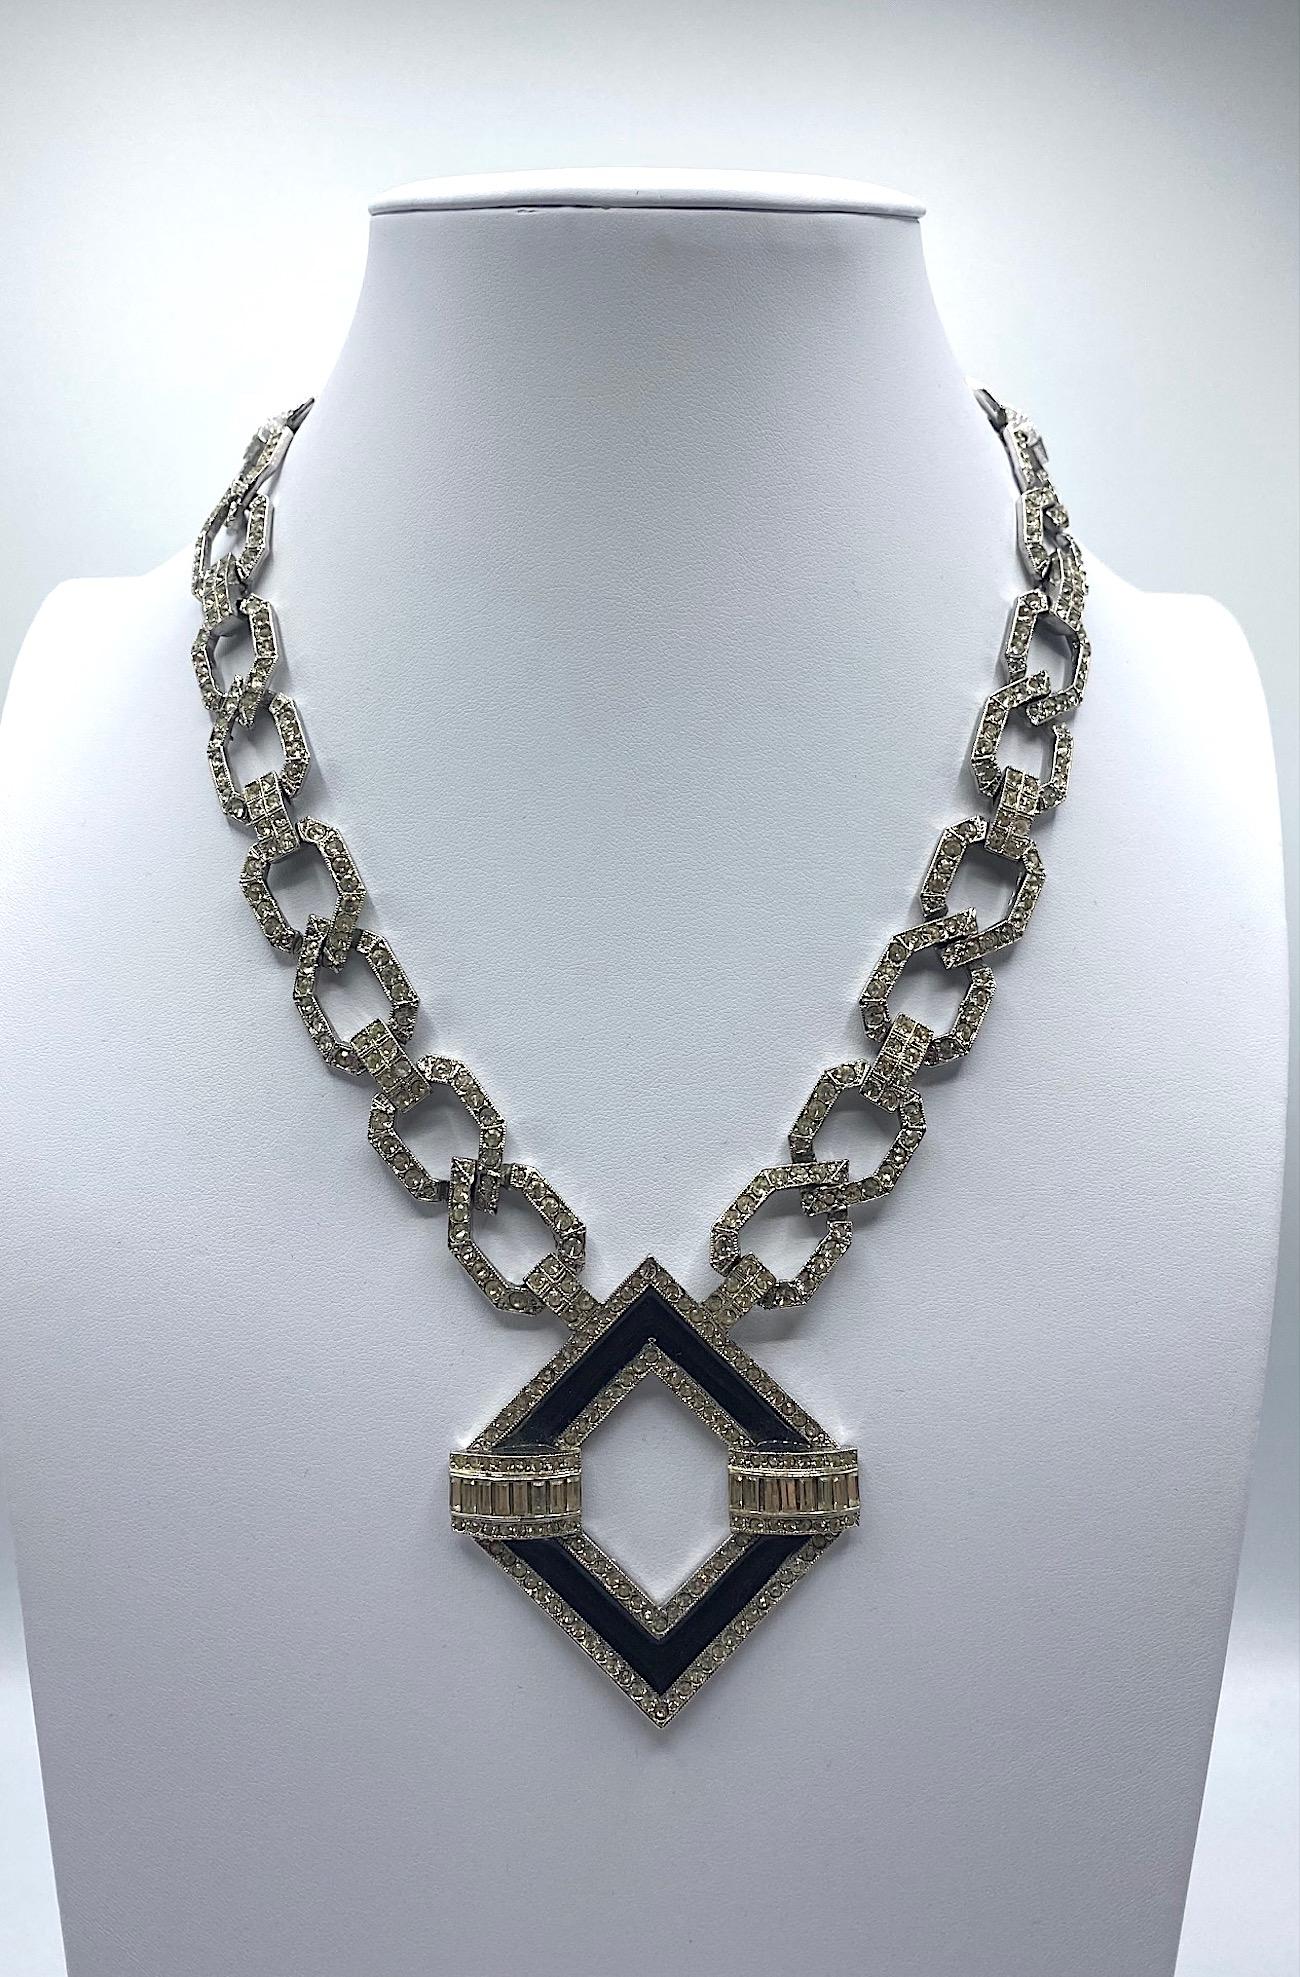 Kenneth Jay Lane 1980s Art Deco Revival Necklace 4